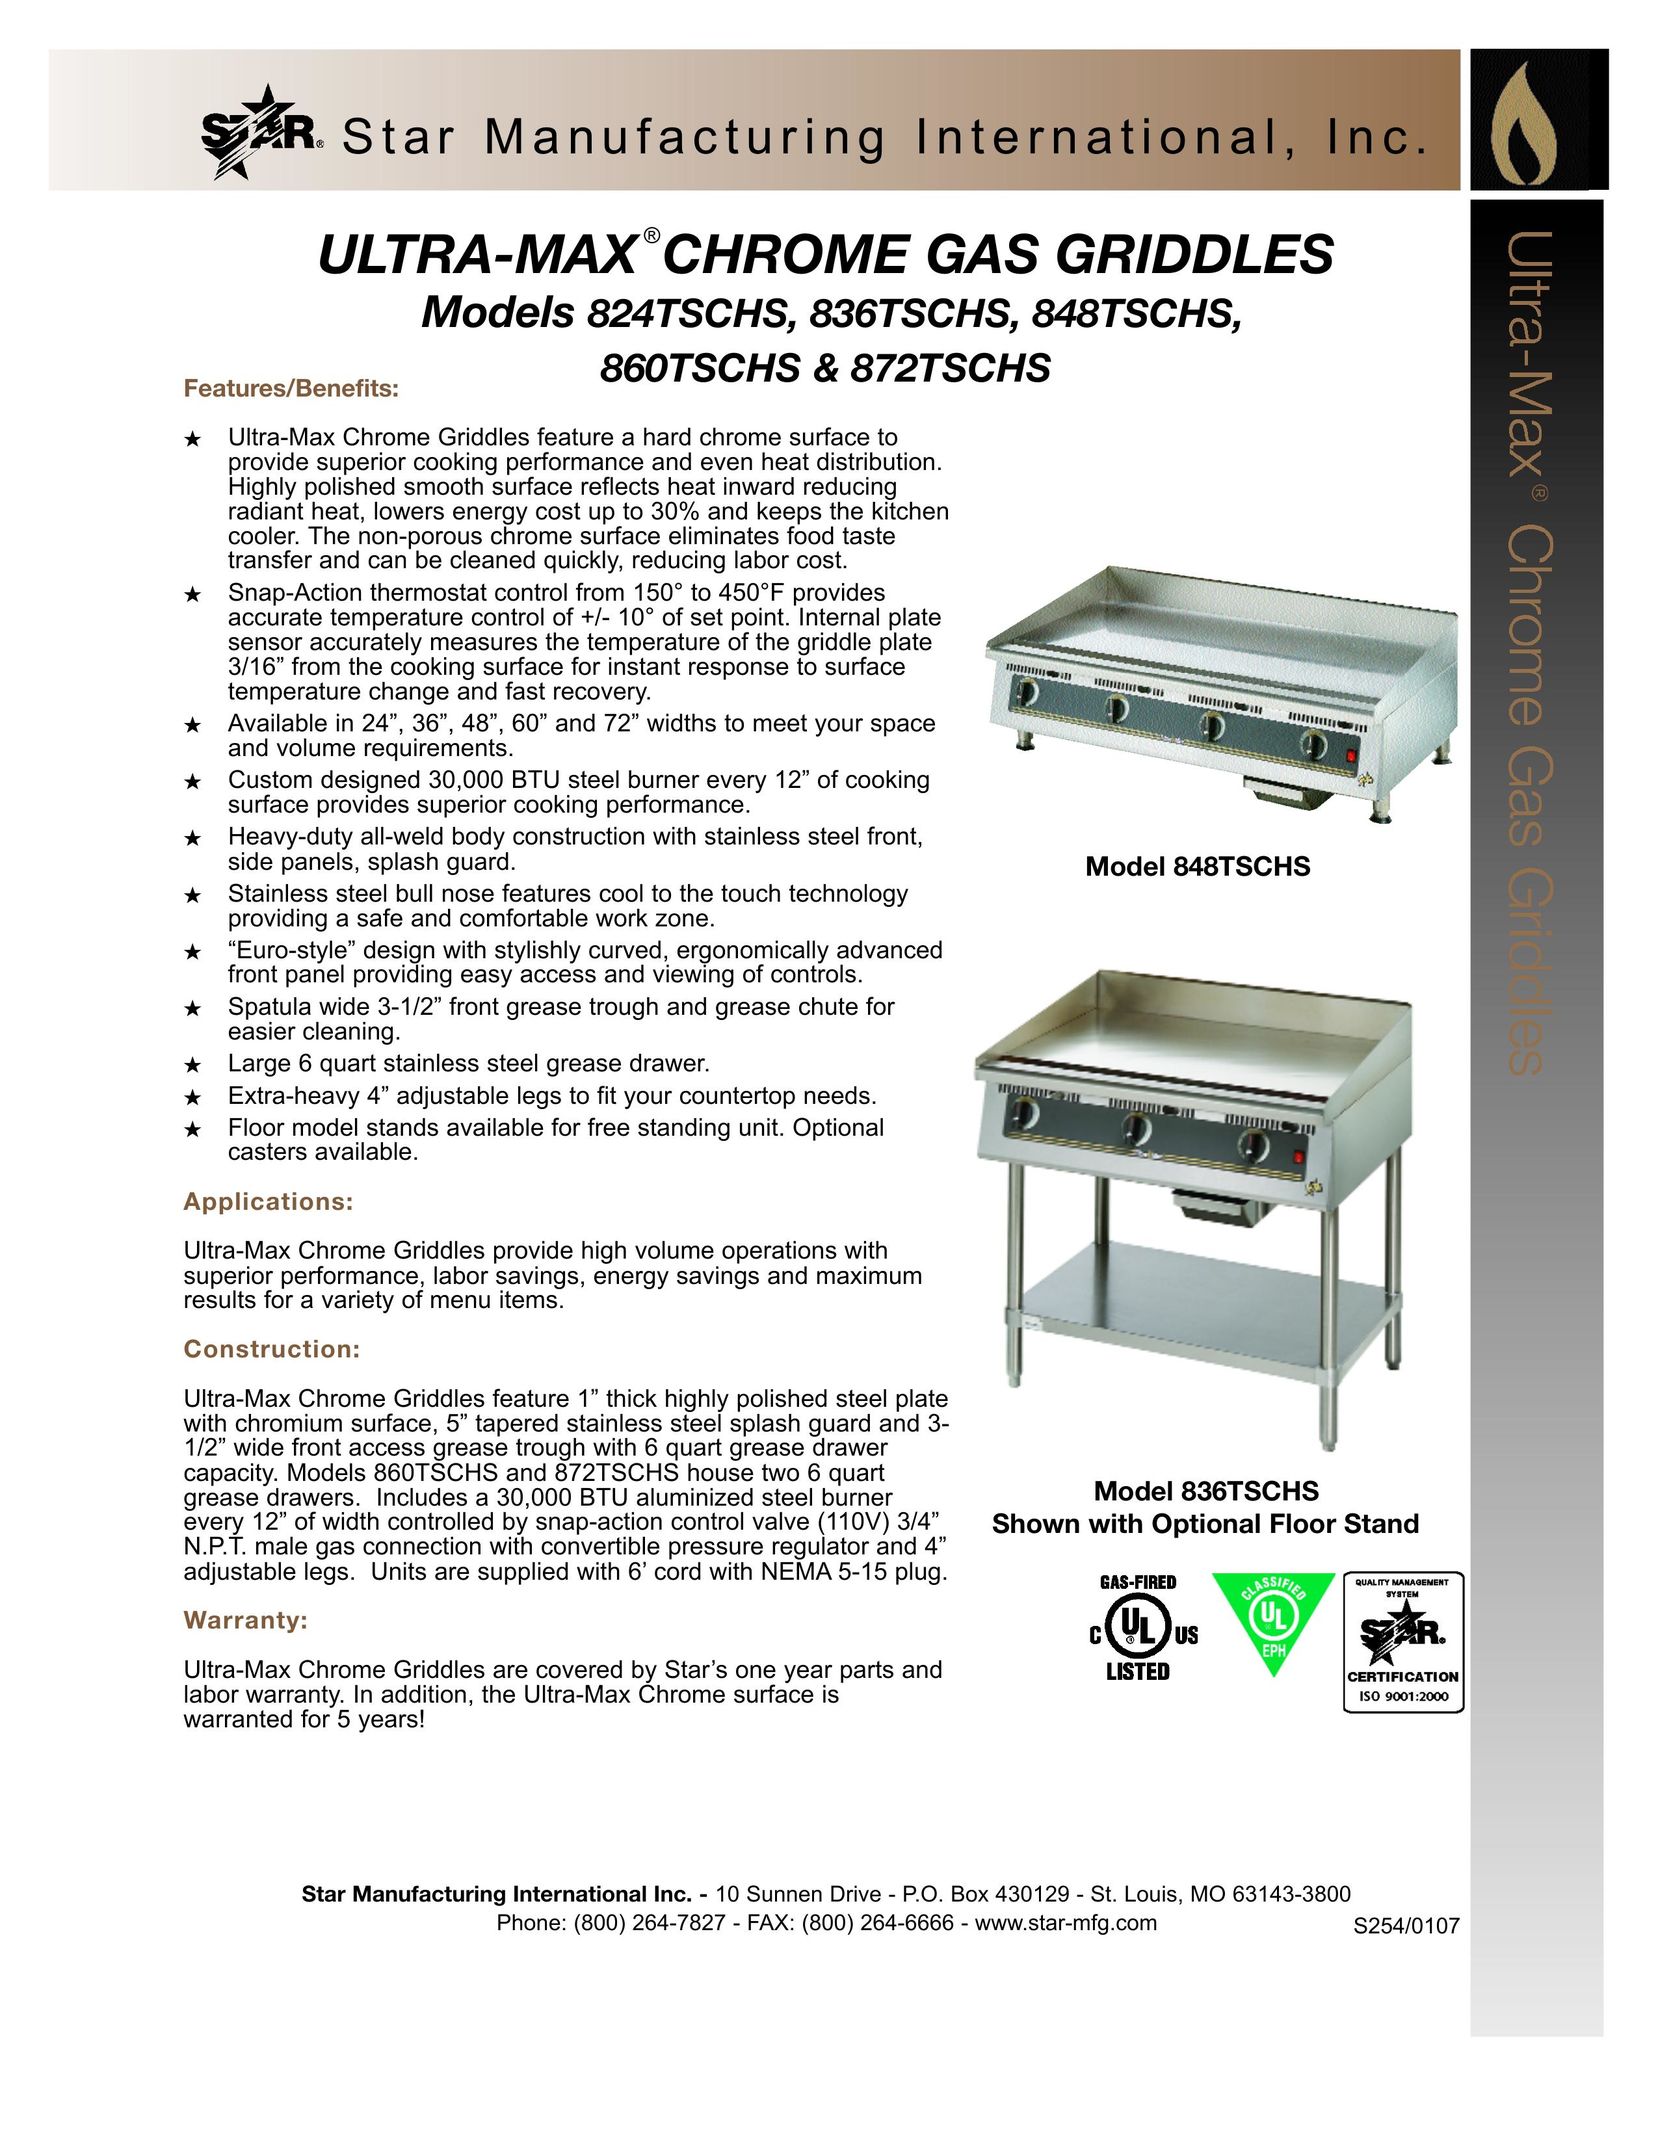 Star Manufacturing 872TSCHS Griddle User Manual